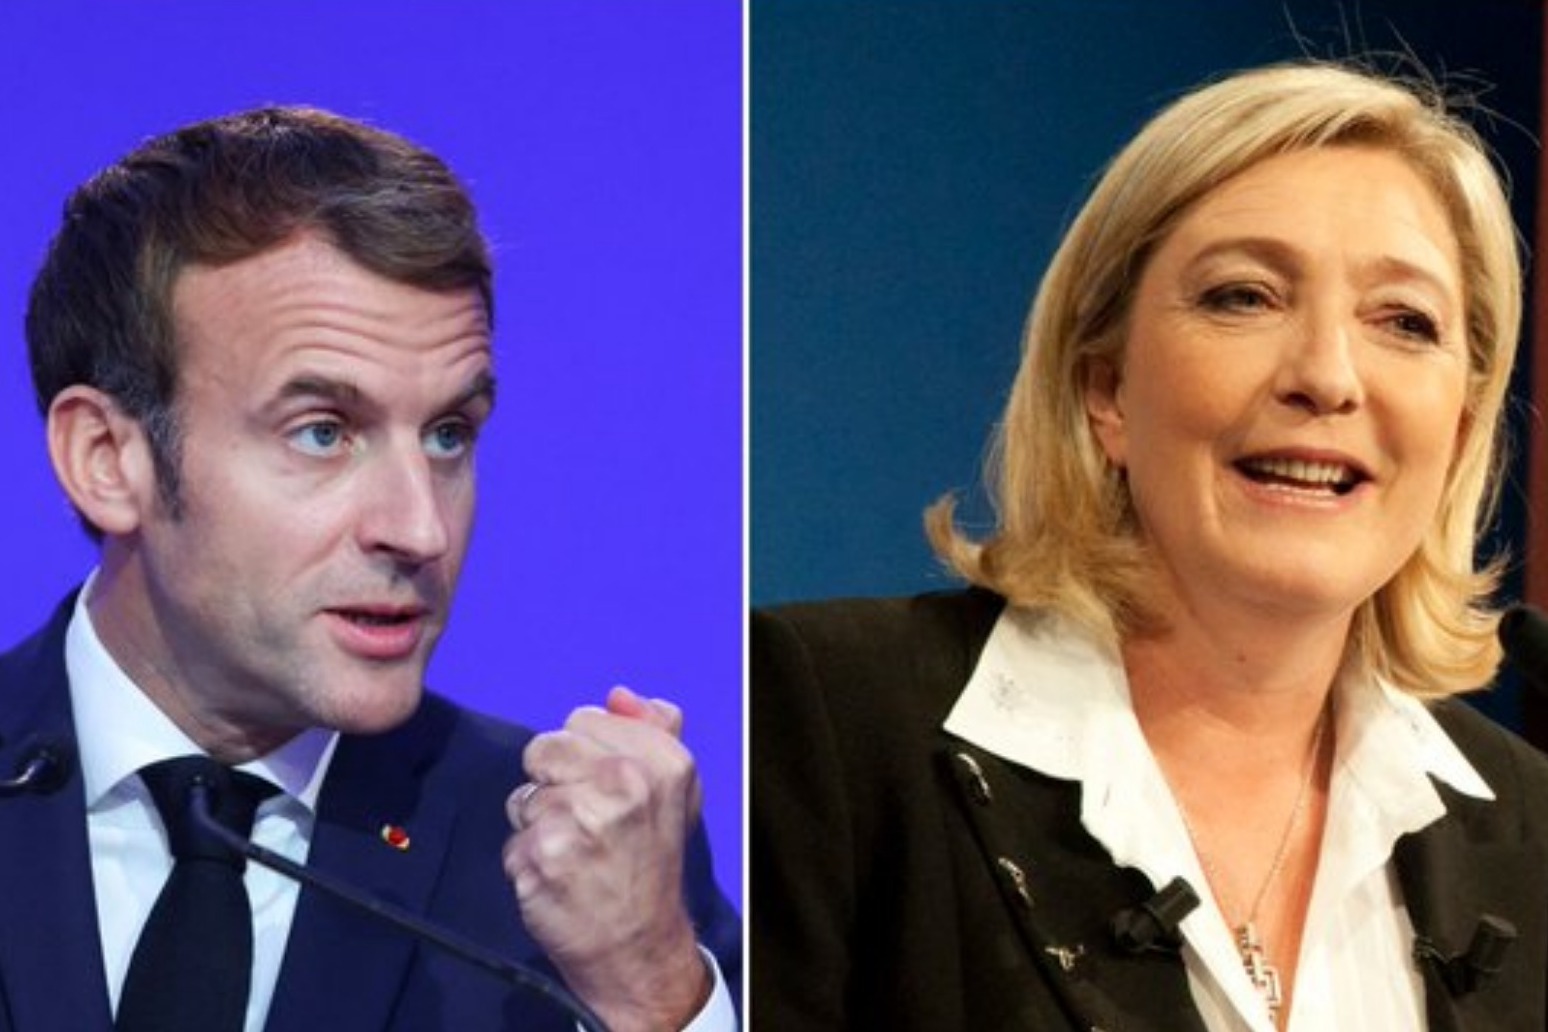 Macron and far-right rival Le Pen set for run-off in French election 